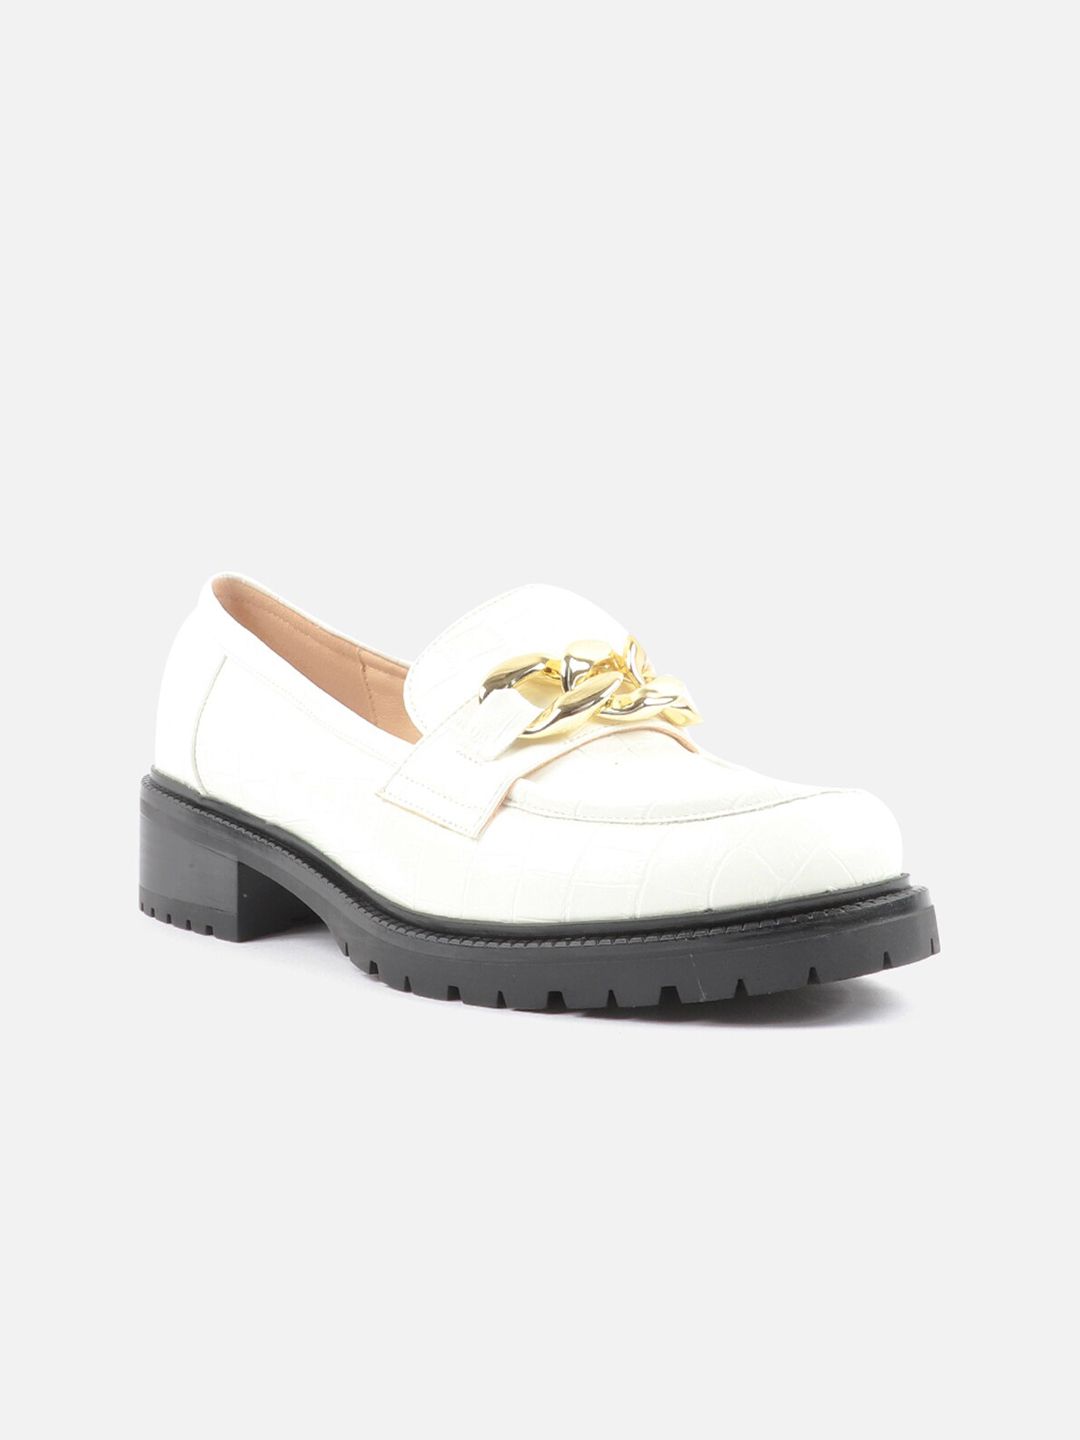 Carlton London Women Off White & Gold Textured Synthetic Patent Slip-On Loafers Price in India